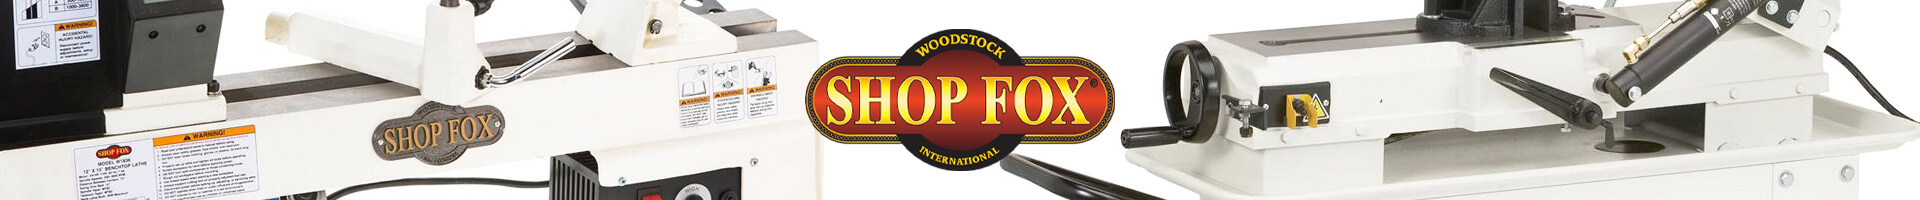 Save up to $1,000 on select Shop Fox machinery